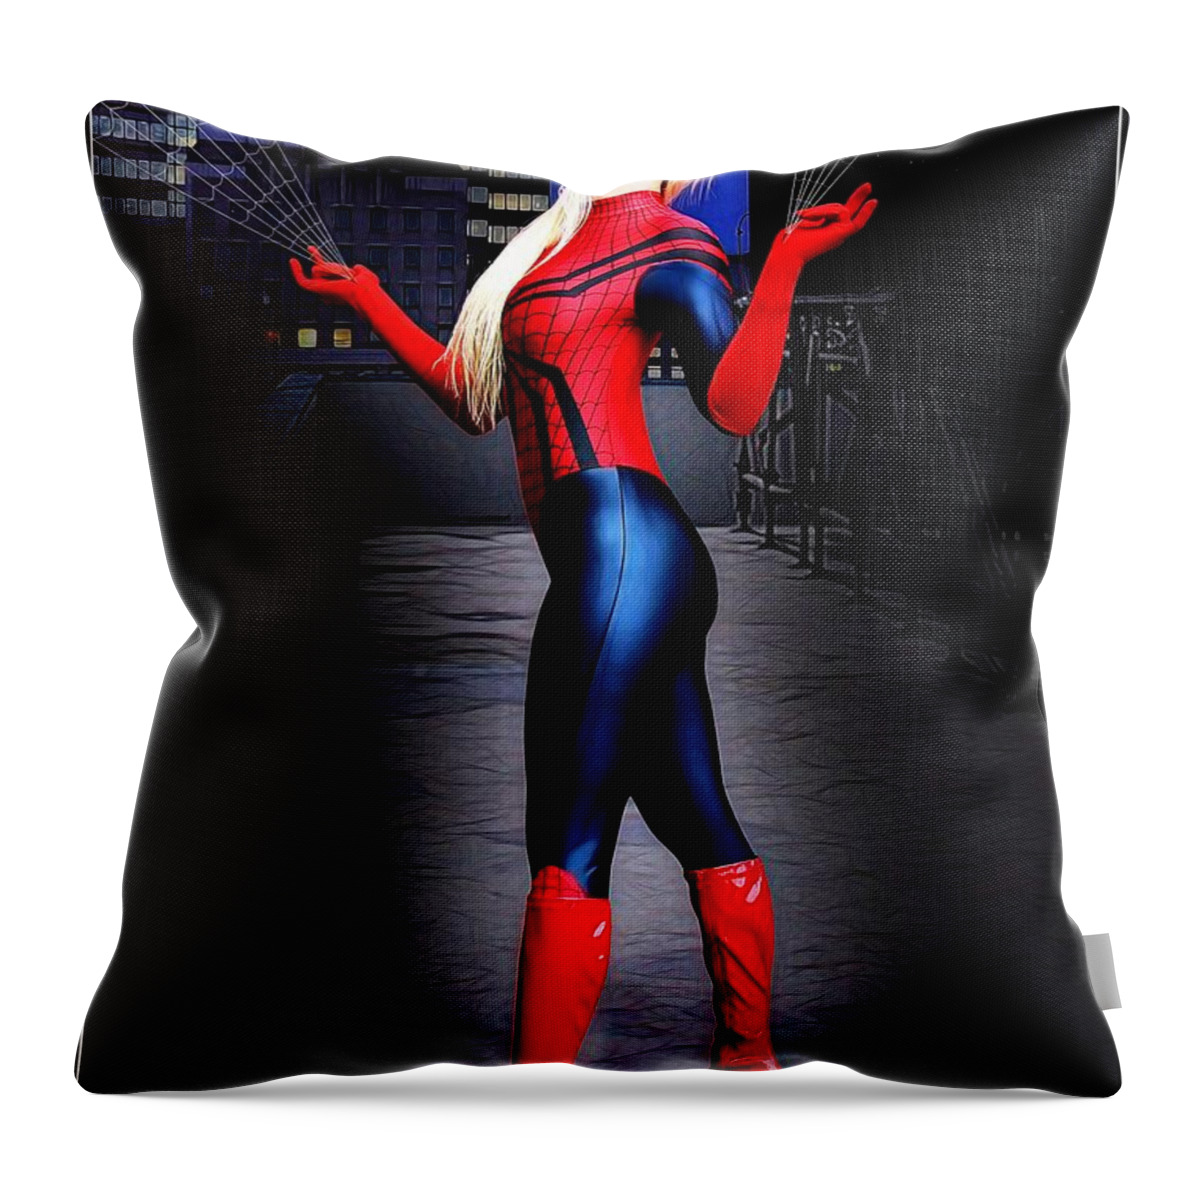 Fantasy Throw Pillow featuring the painting Web Of The Crimson Spider by Jon Volden